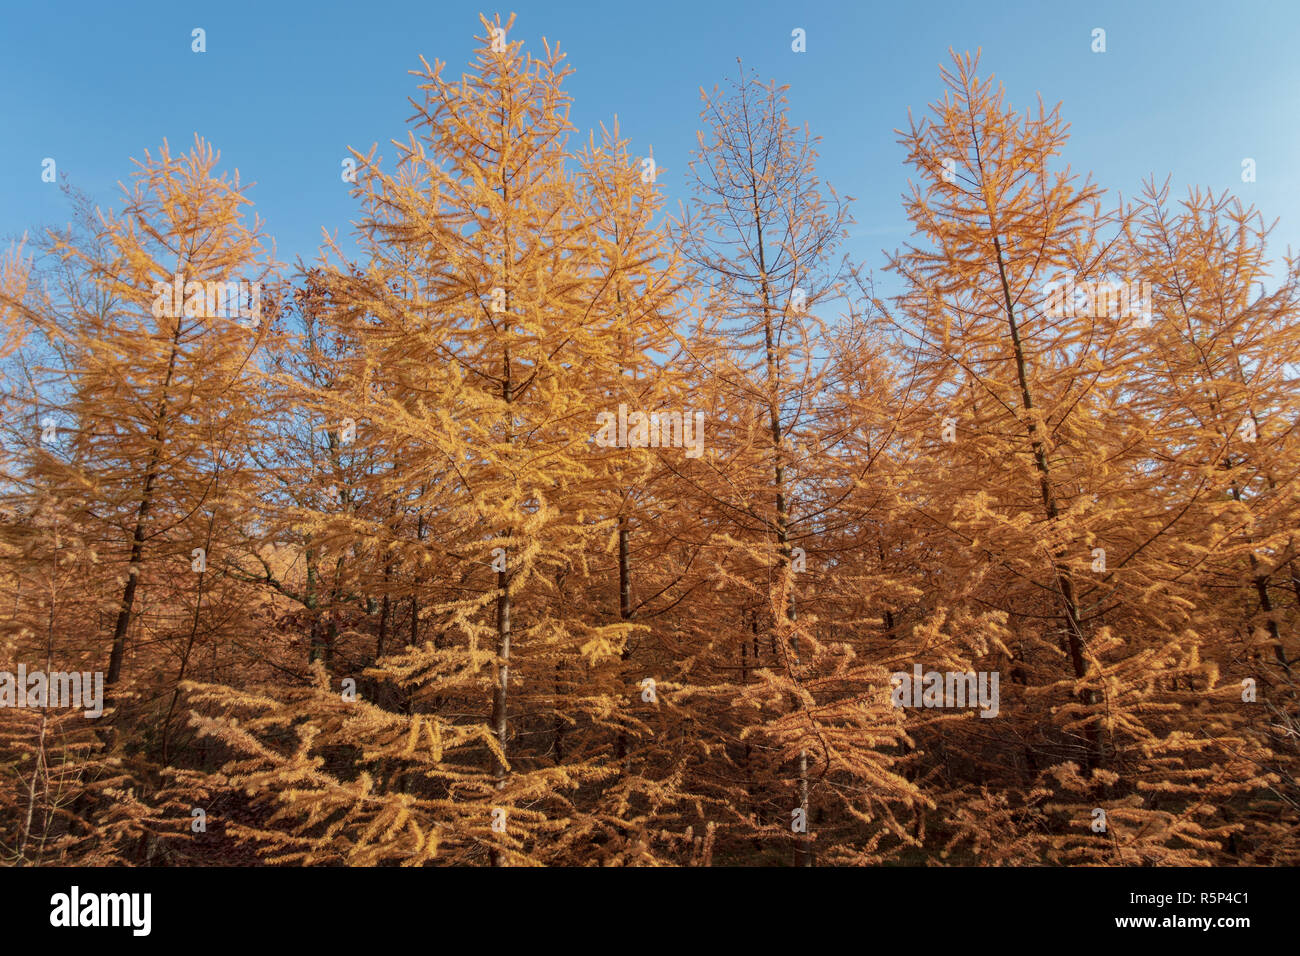 Golden autumn larch trees against a blue sky Stock Photo